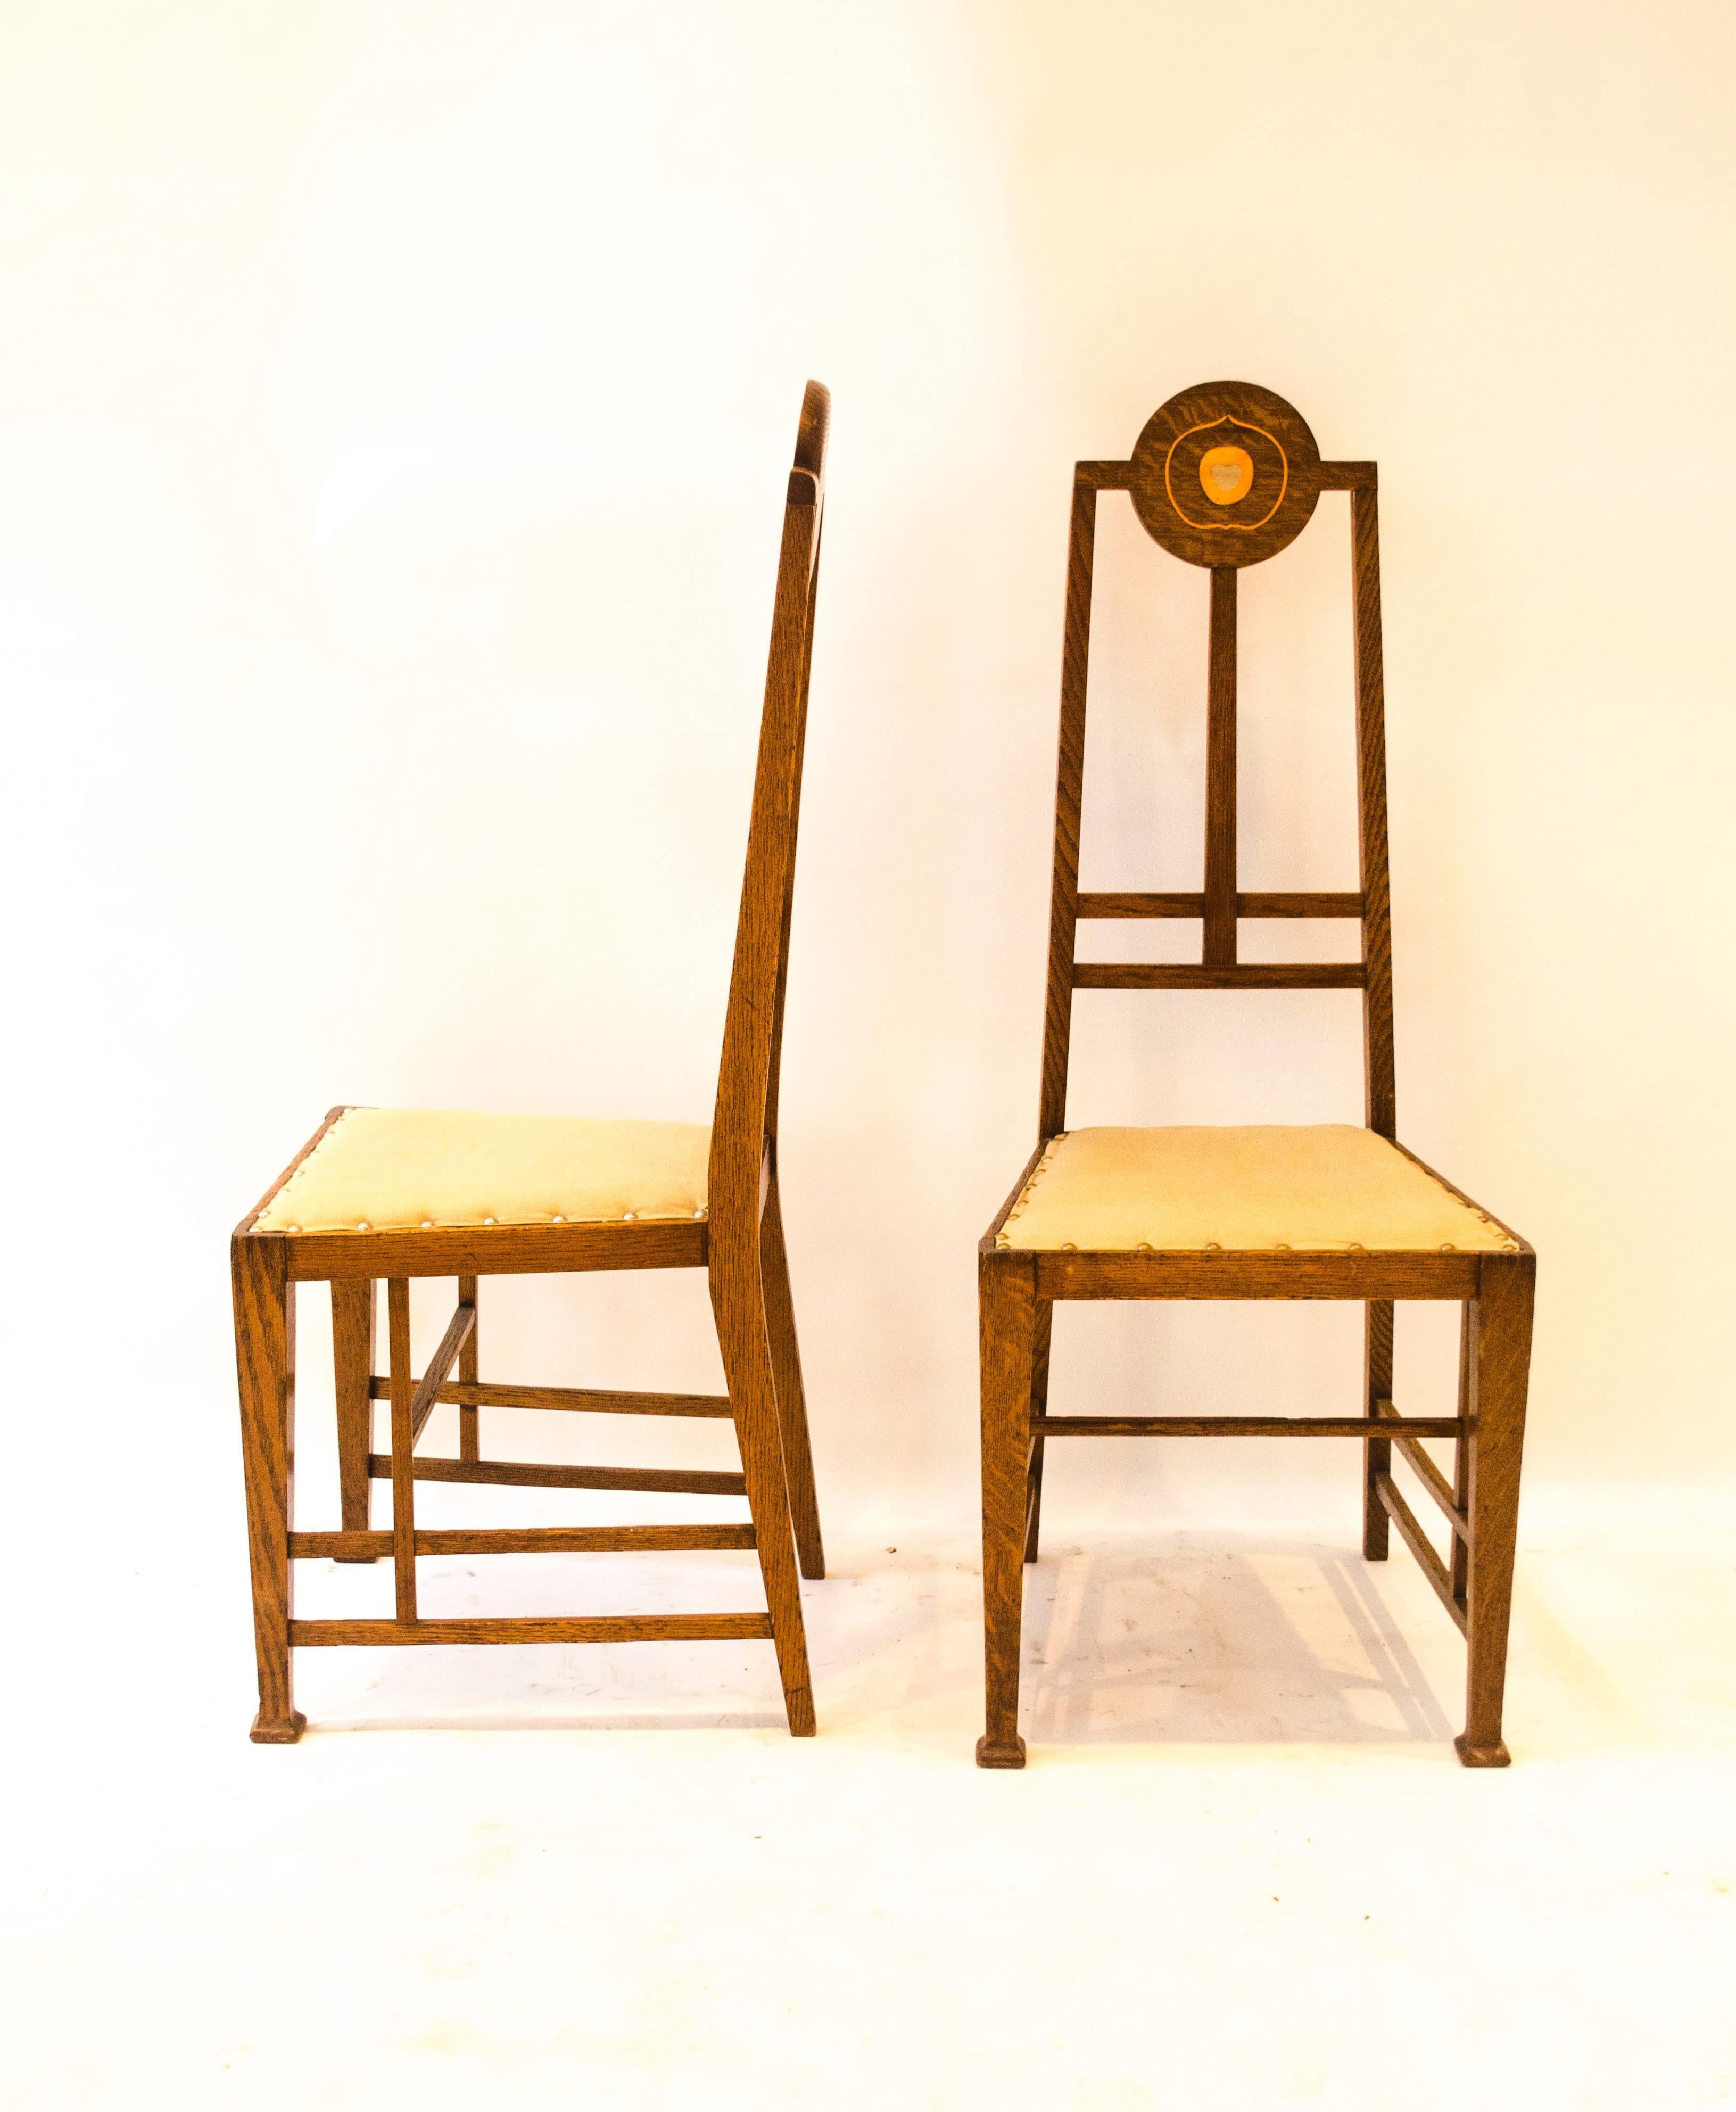 Designed by George Montague Ellwood (1875-1955) and made by J S Henry (John Sollie Henry, founded circa 1880) of Old Street, London.
A pair of exceptional Arts & Crafts oak side chairs designed by George Montague Ellwood and made by J S Henry,